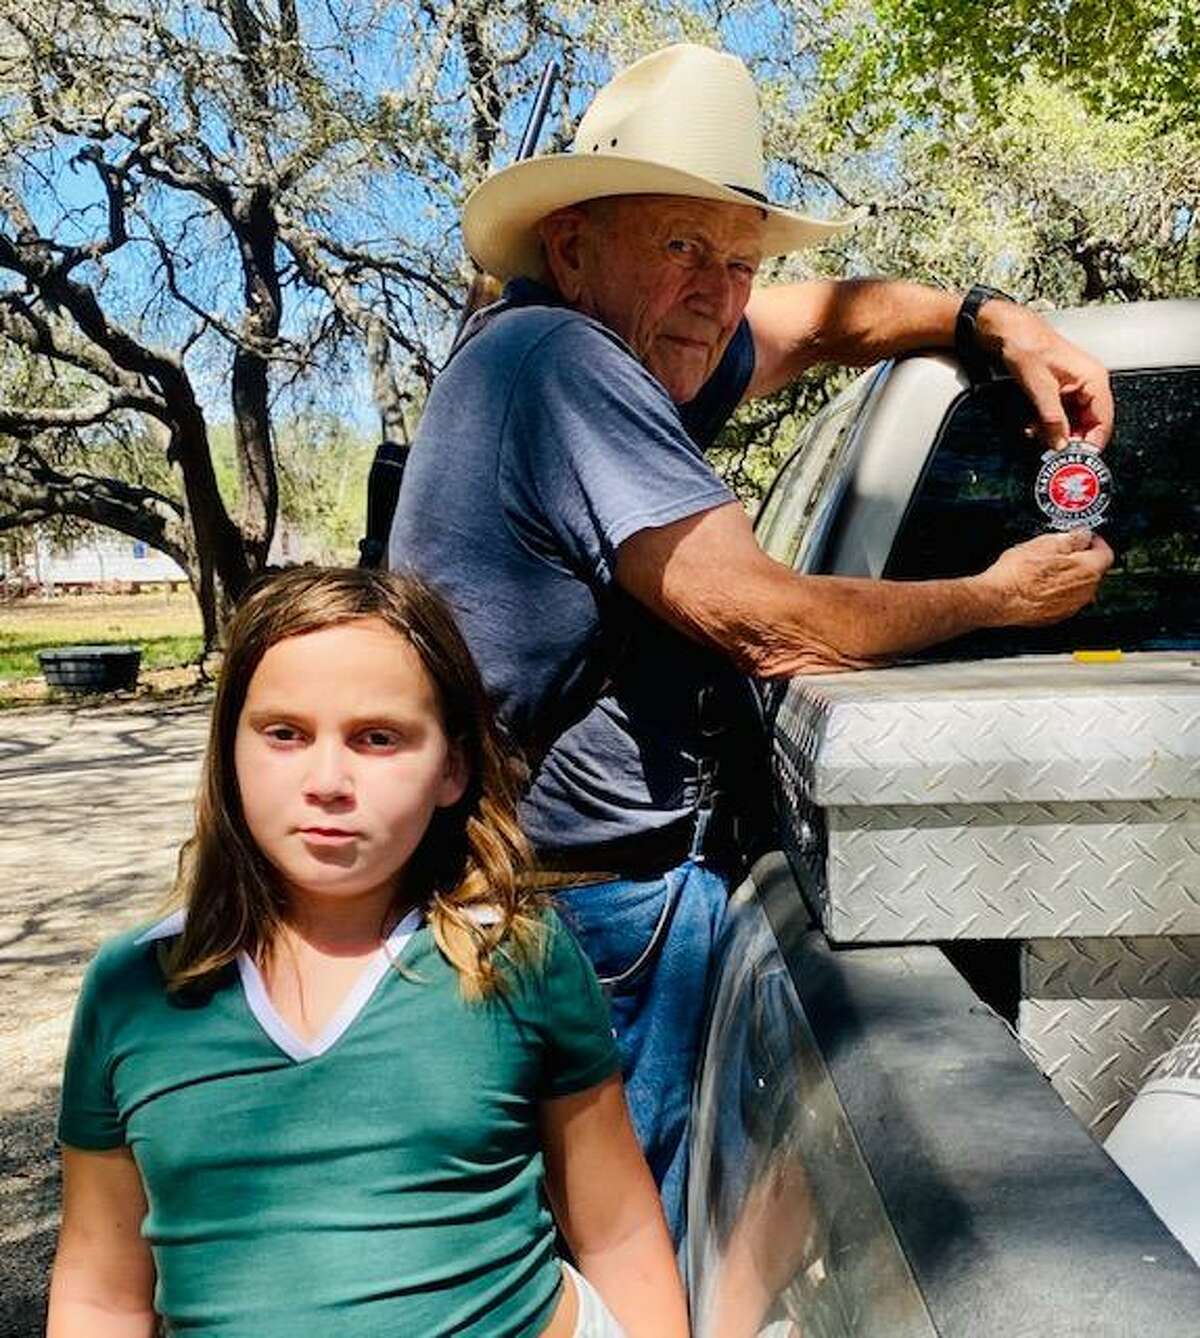 “Finding Bernie Phillip’s Aug. 10 guest column was like finding a well of cool, sweet water in the middle of a long Texas drought,” writes Susan Sabino. Phillip, pictured peeling off his NRA sticker, with his 10-year-old granddaughter, Sophie Gronnevik, called for commonsense gun reforms.